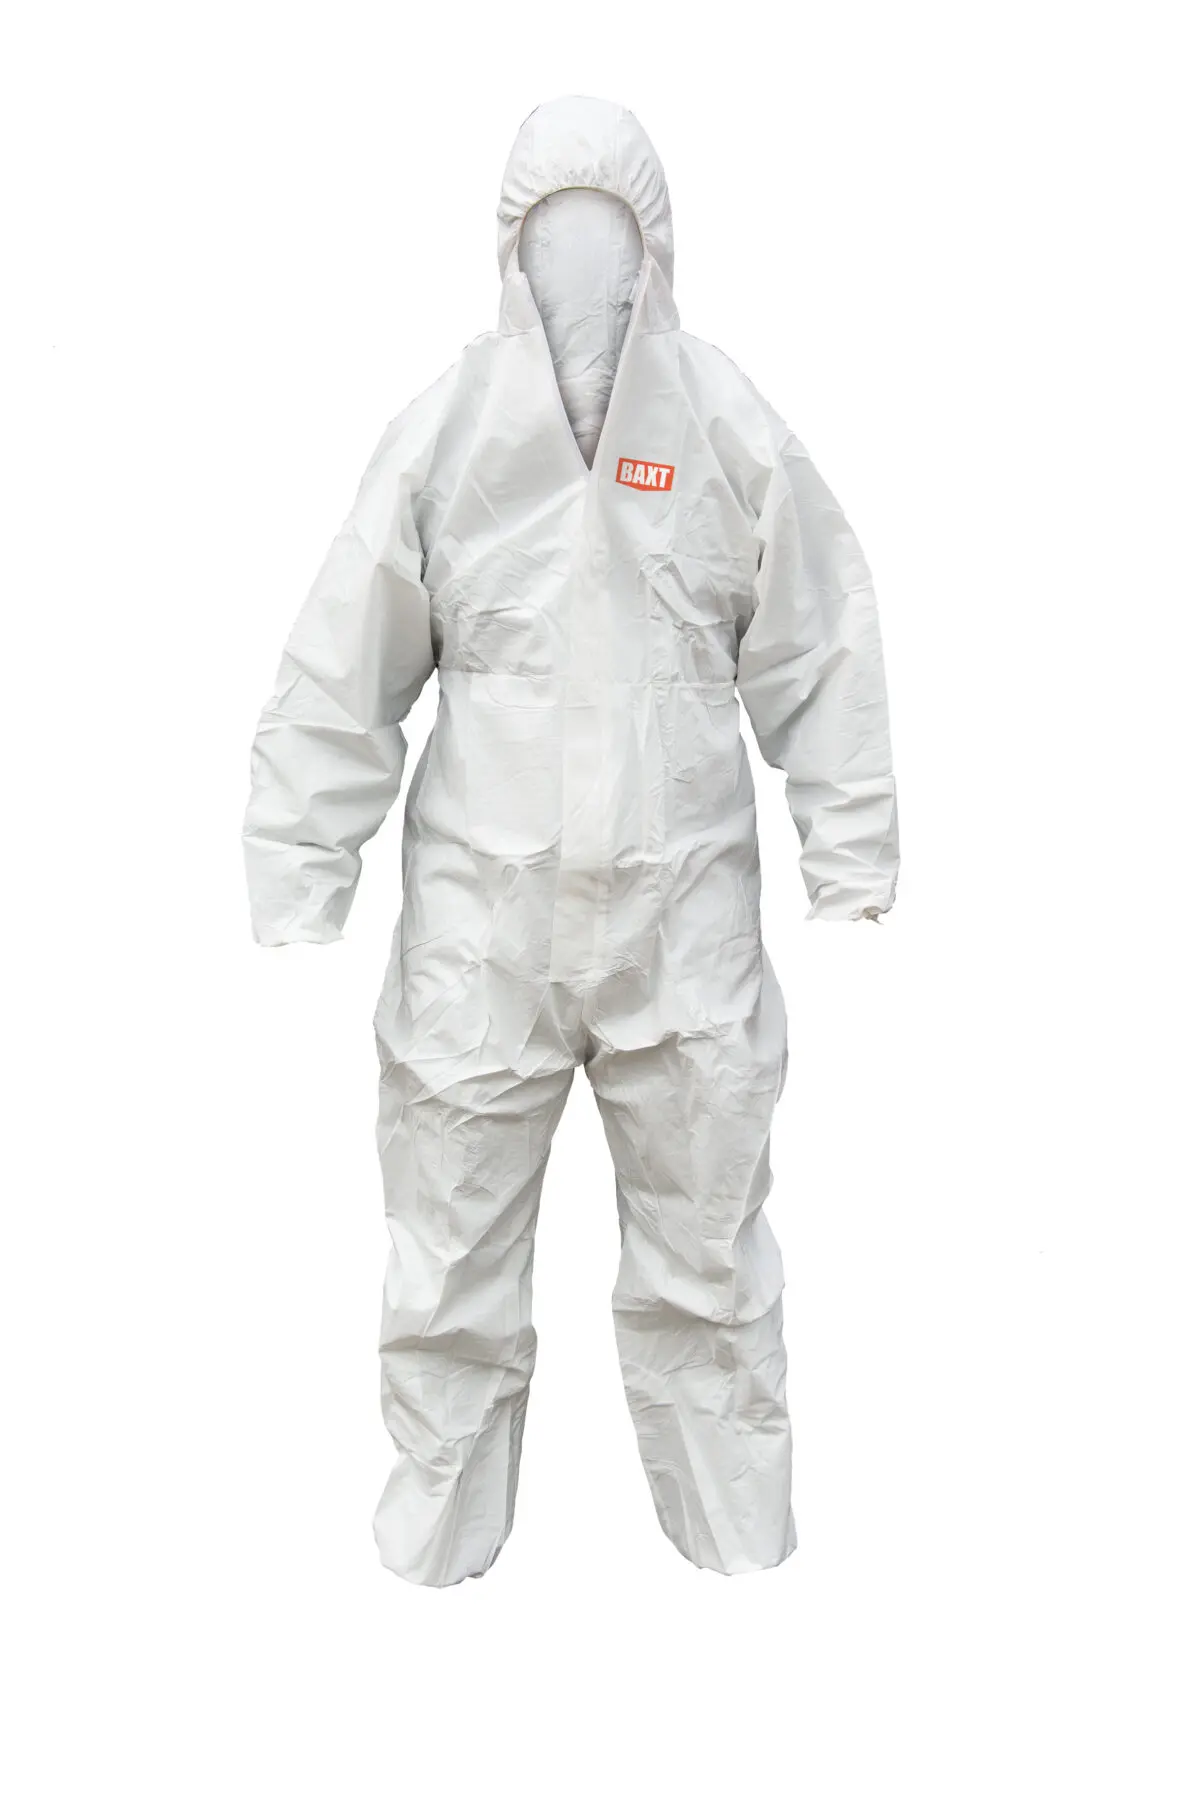 BAXT C7 Disposable Coverall from DTC Tools